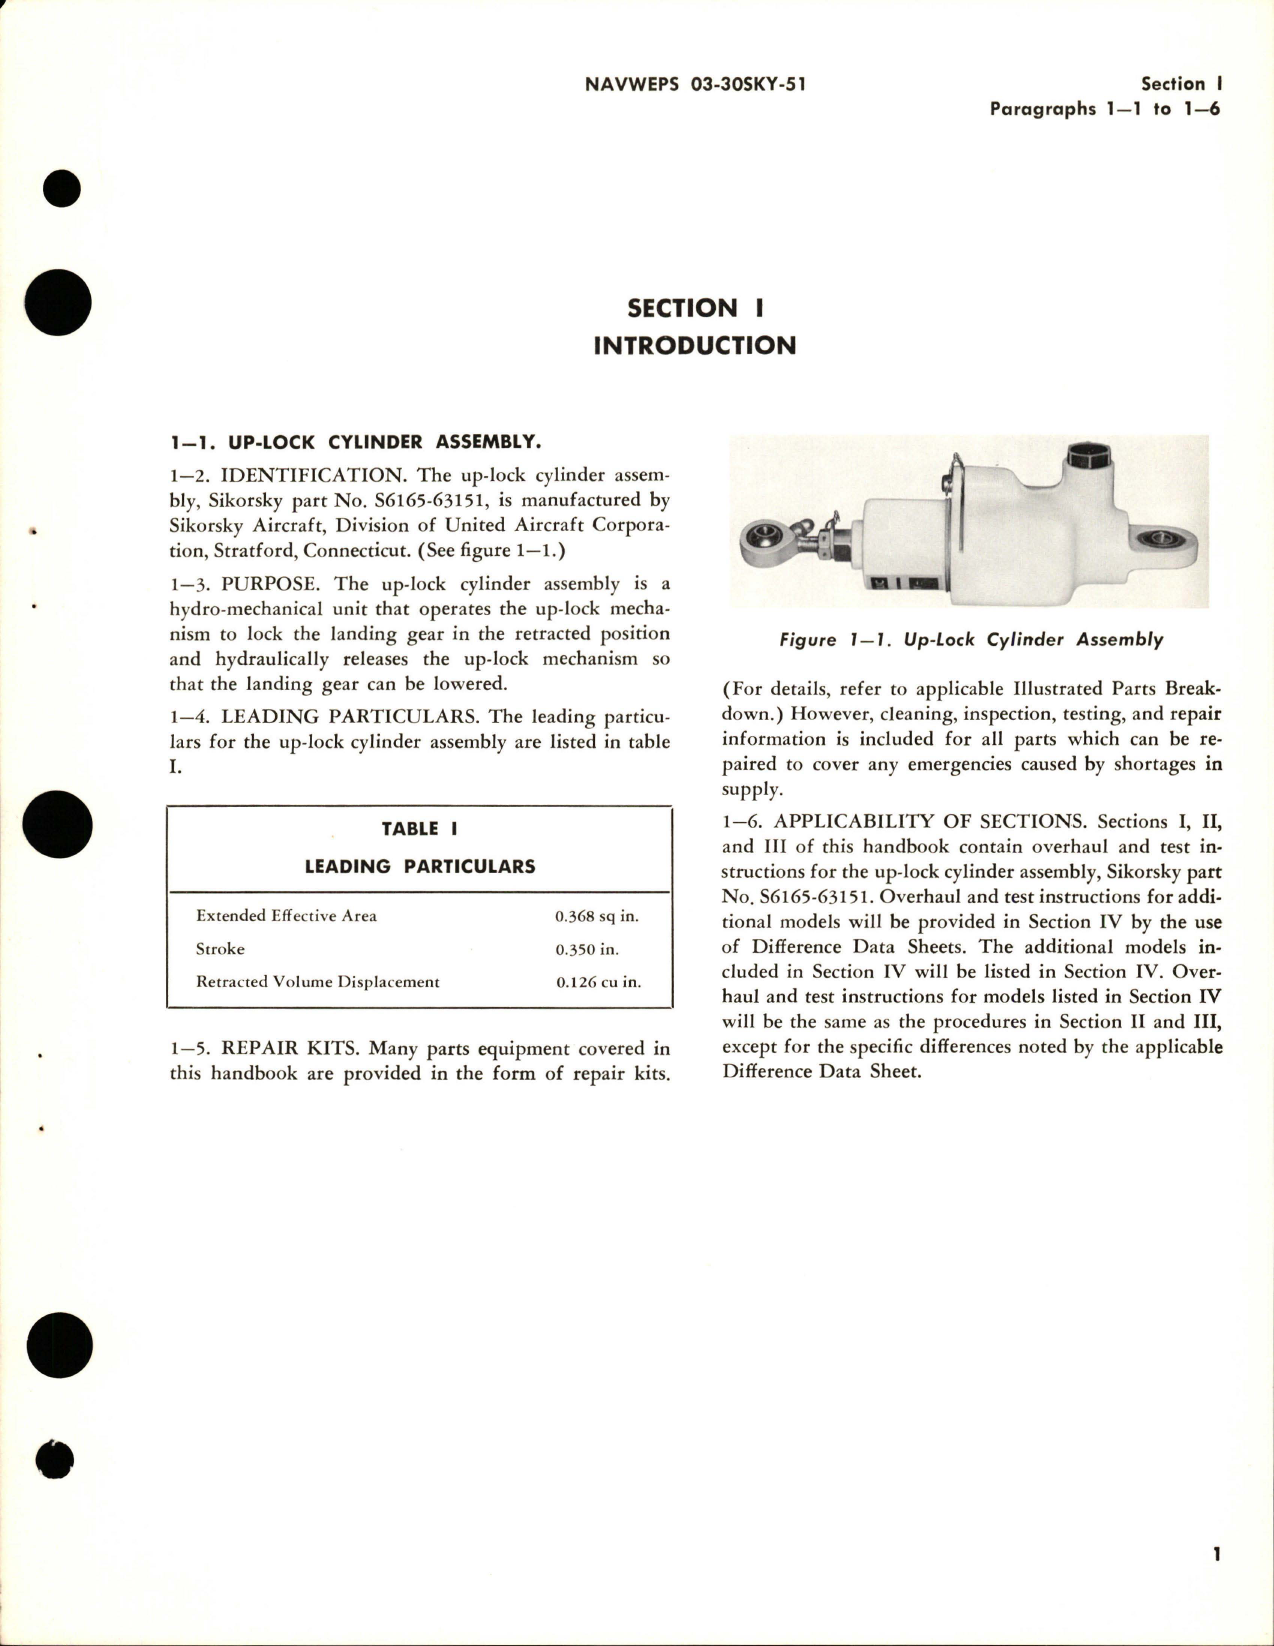 Sample page 5 from AirCorps Library document: Overhaul Instructions for Up-Lock Cylinder Assembly - Part S6165-63151